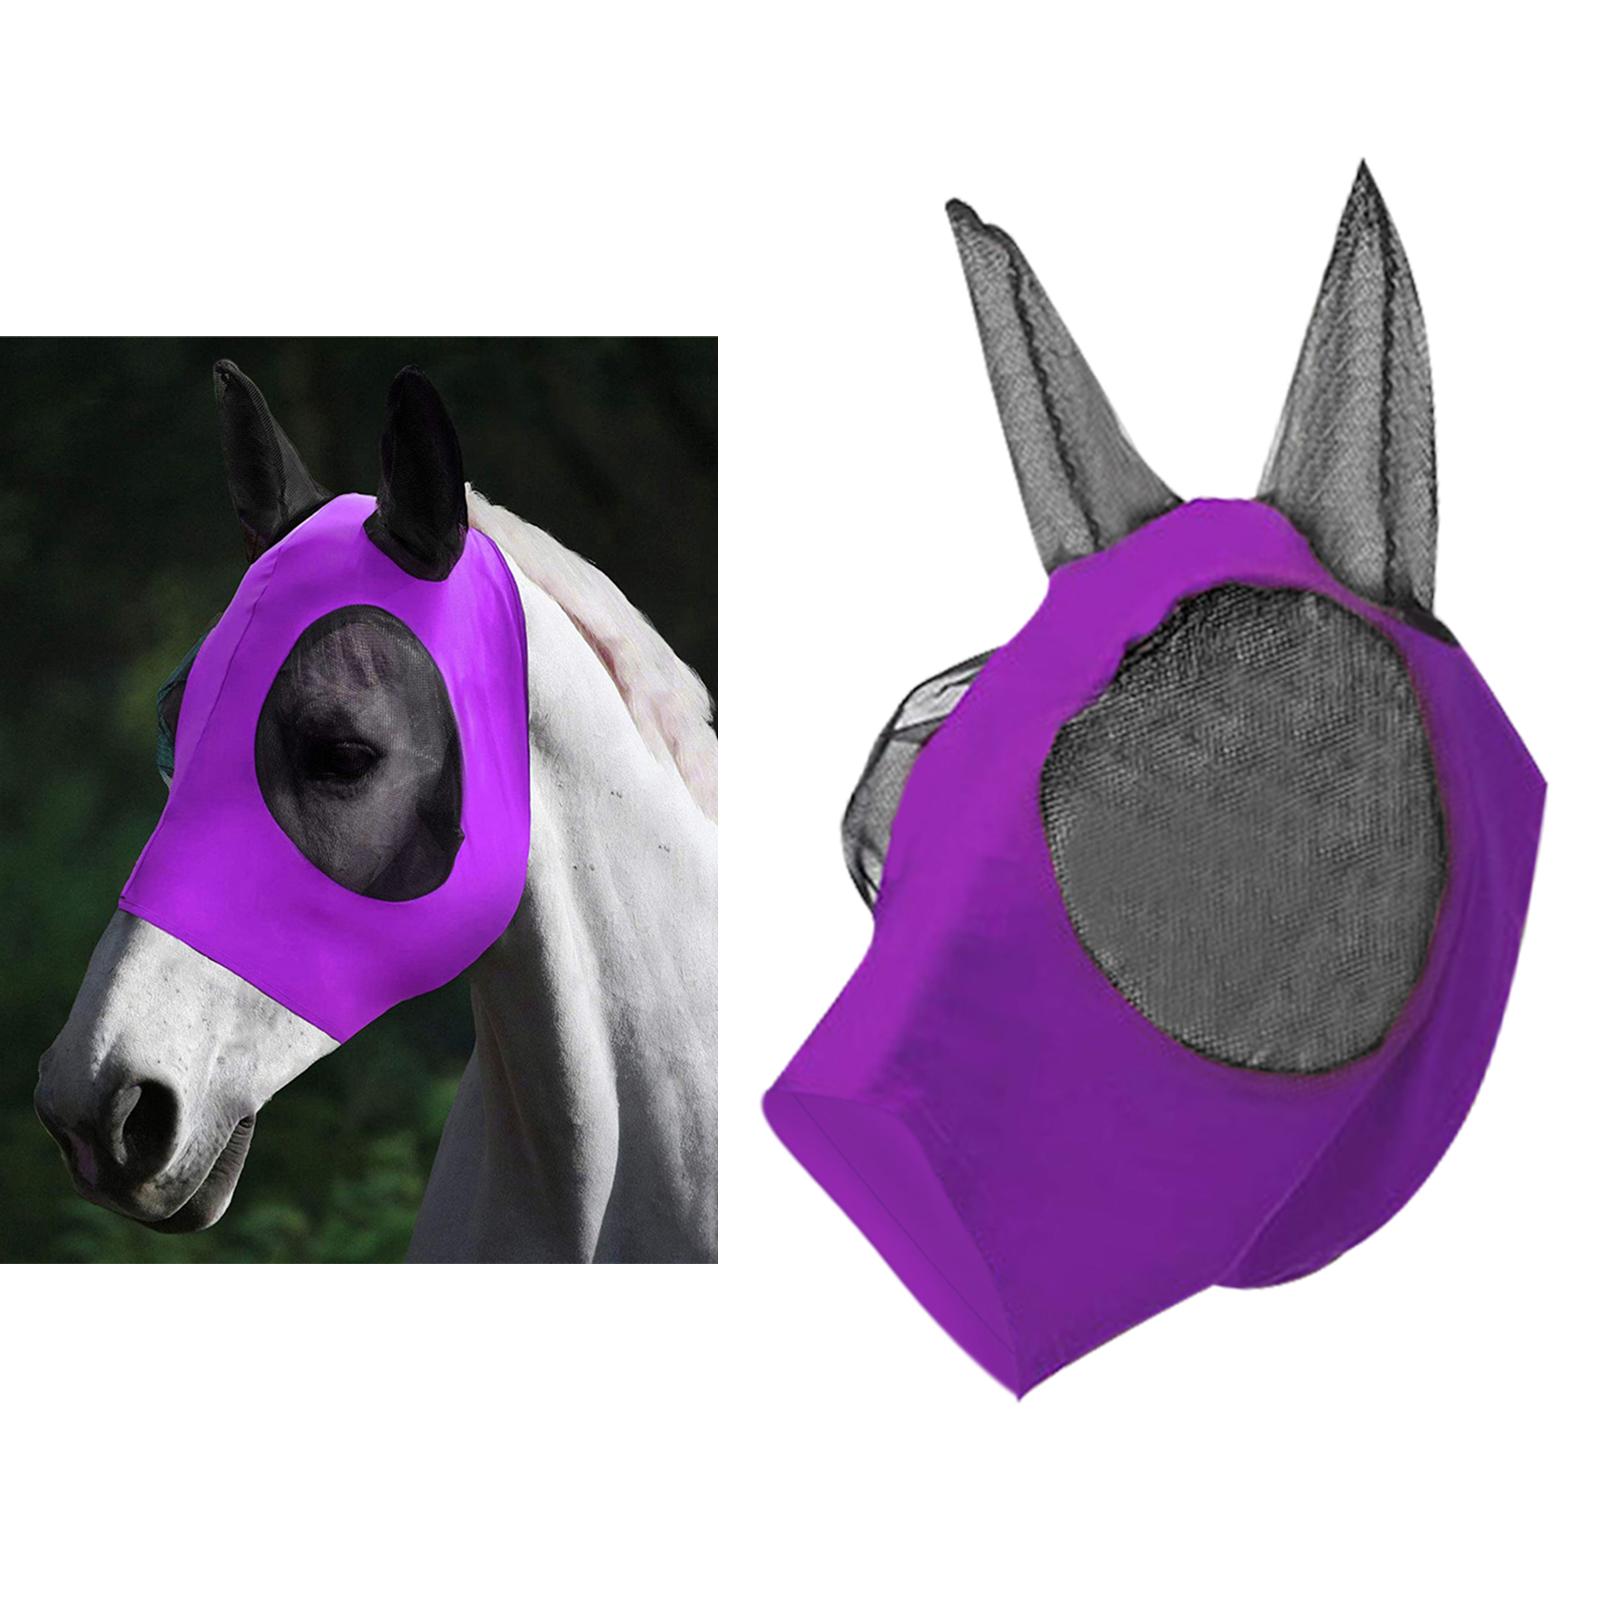 Horse Fly Mask Protective Net Hood Horses Mask with Ears Cover Purple